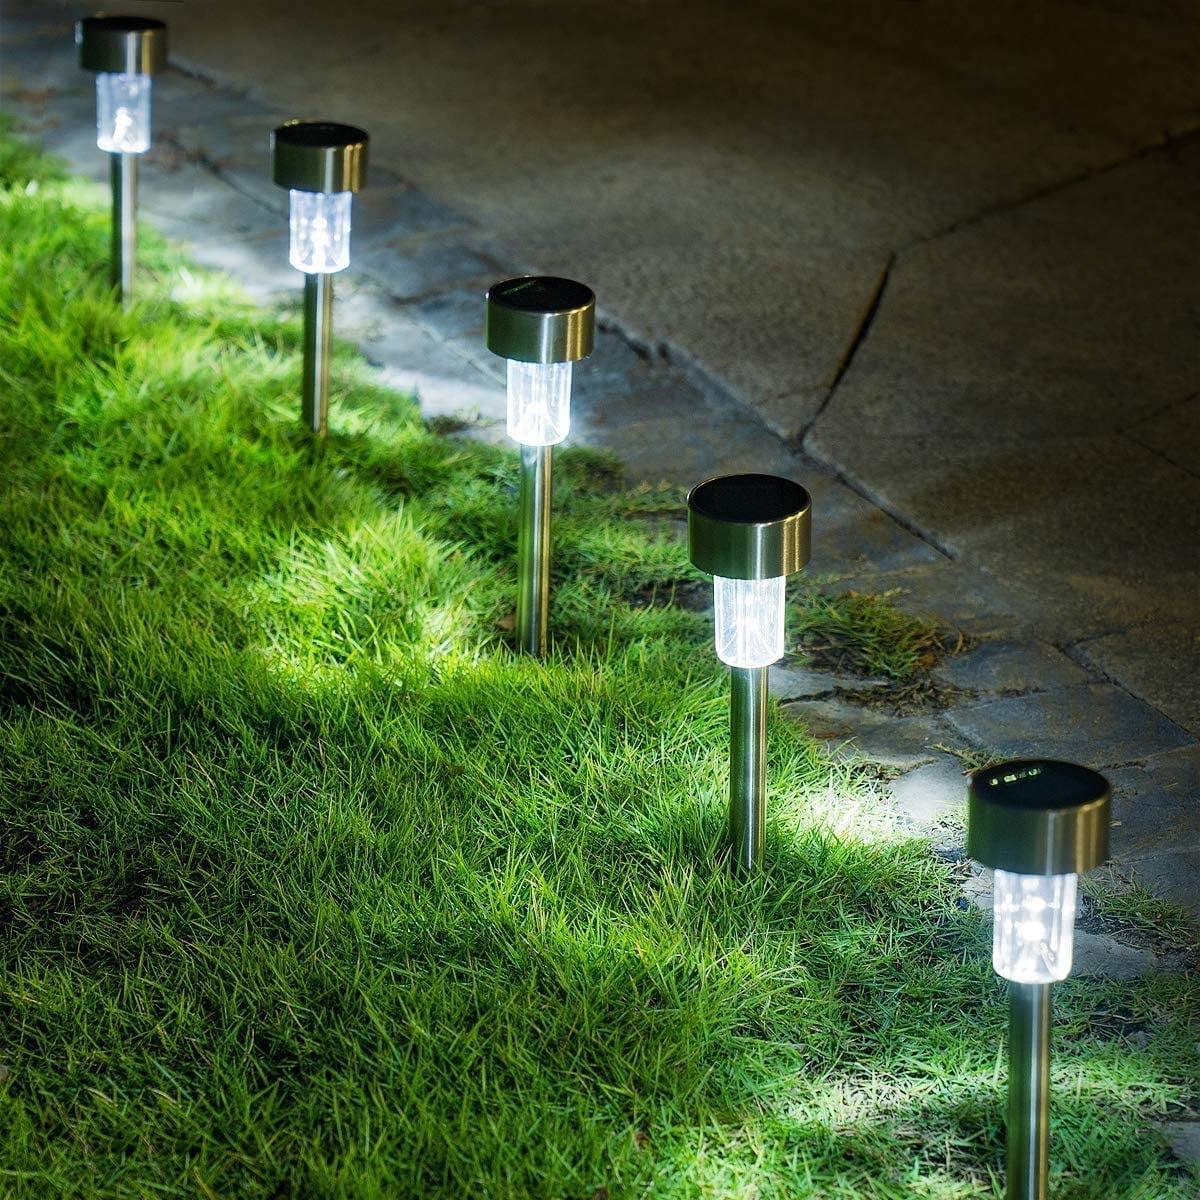 Details about   12 Solar LED Pathway Lights Garden Walkway Landscape Outdoor Patio Driveway Yard 